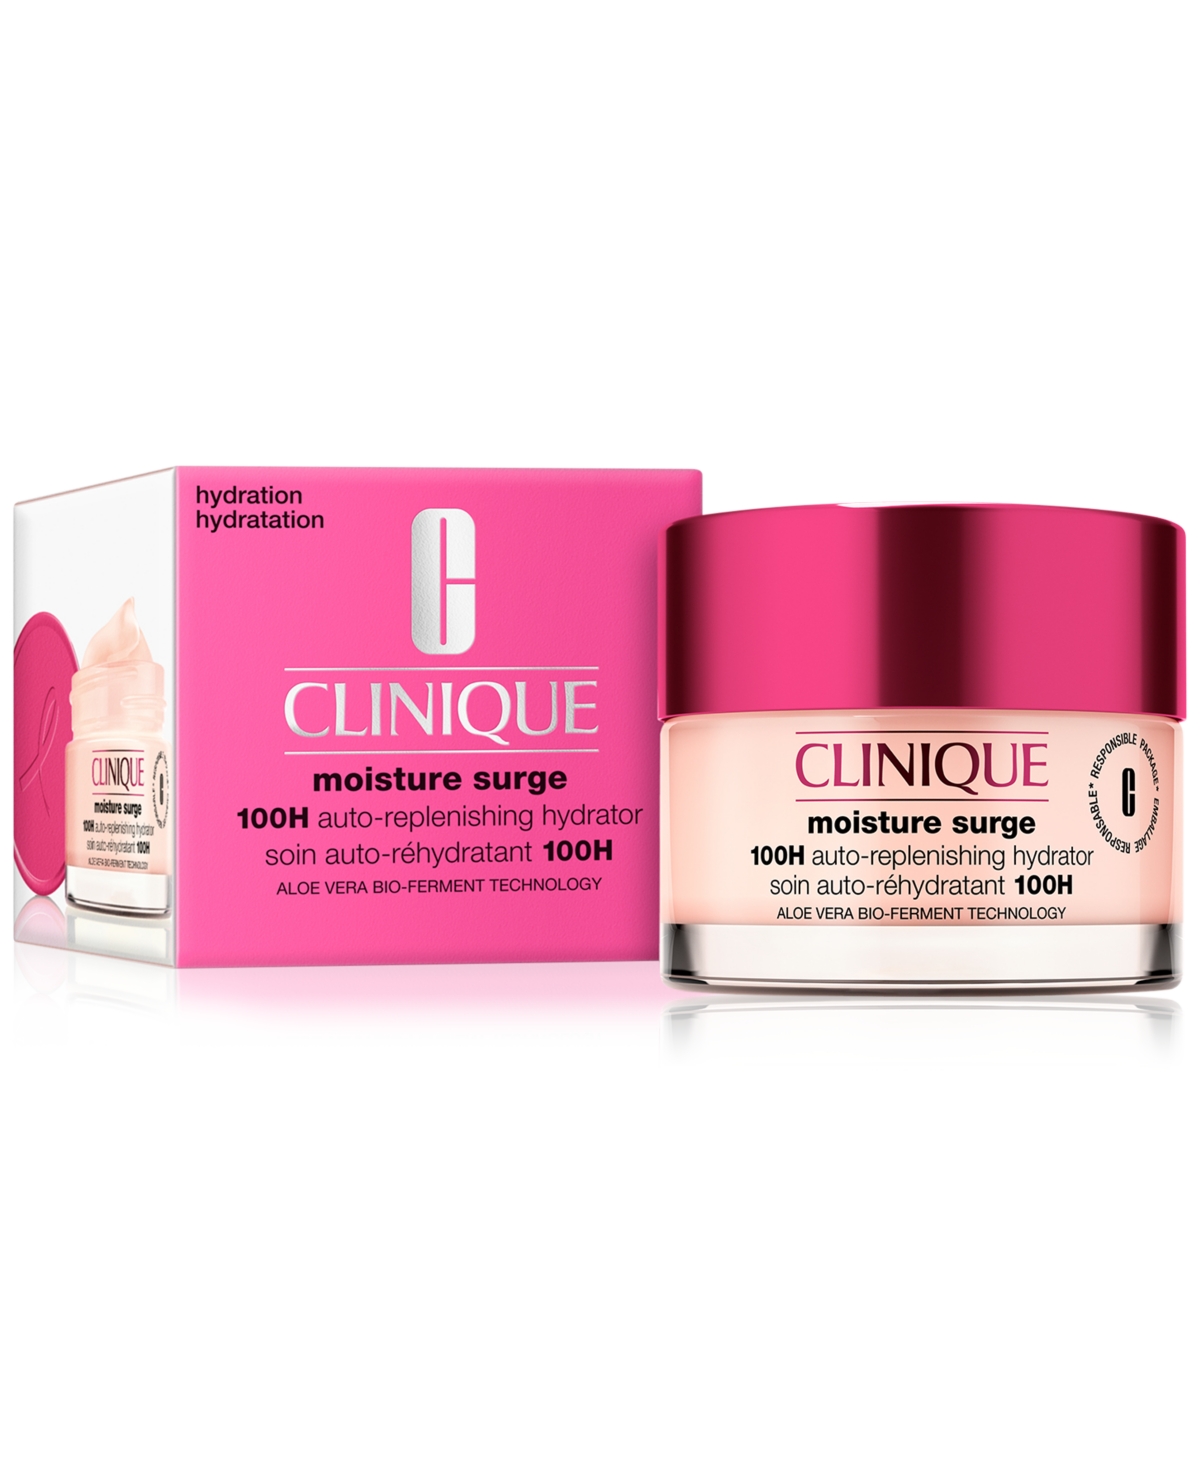 Clinique Great Skin, Great Cause Limited-edition Moisture Surge 100h Auto-replenishing Hydrator, 1.7 Oz.